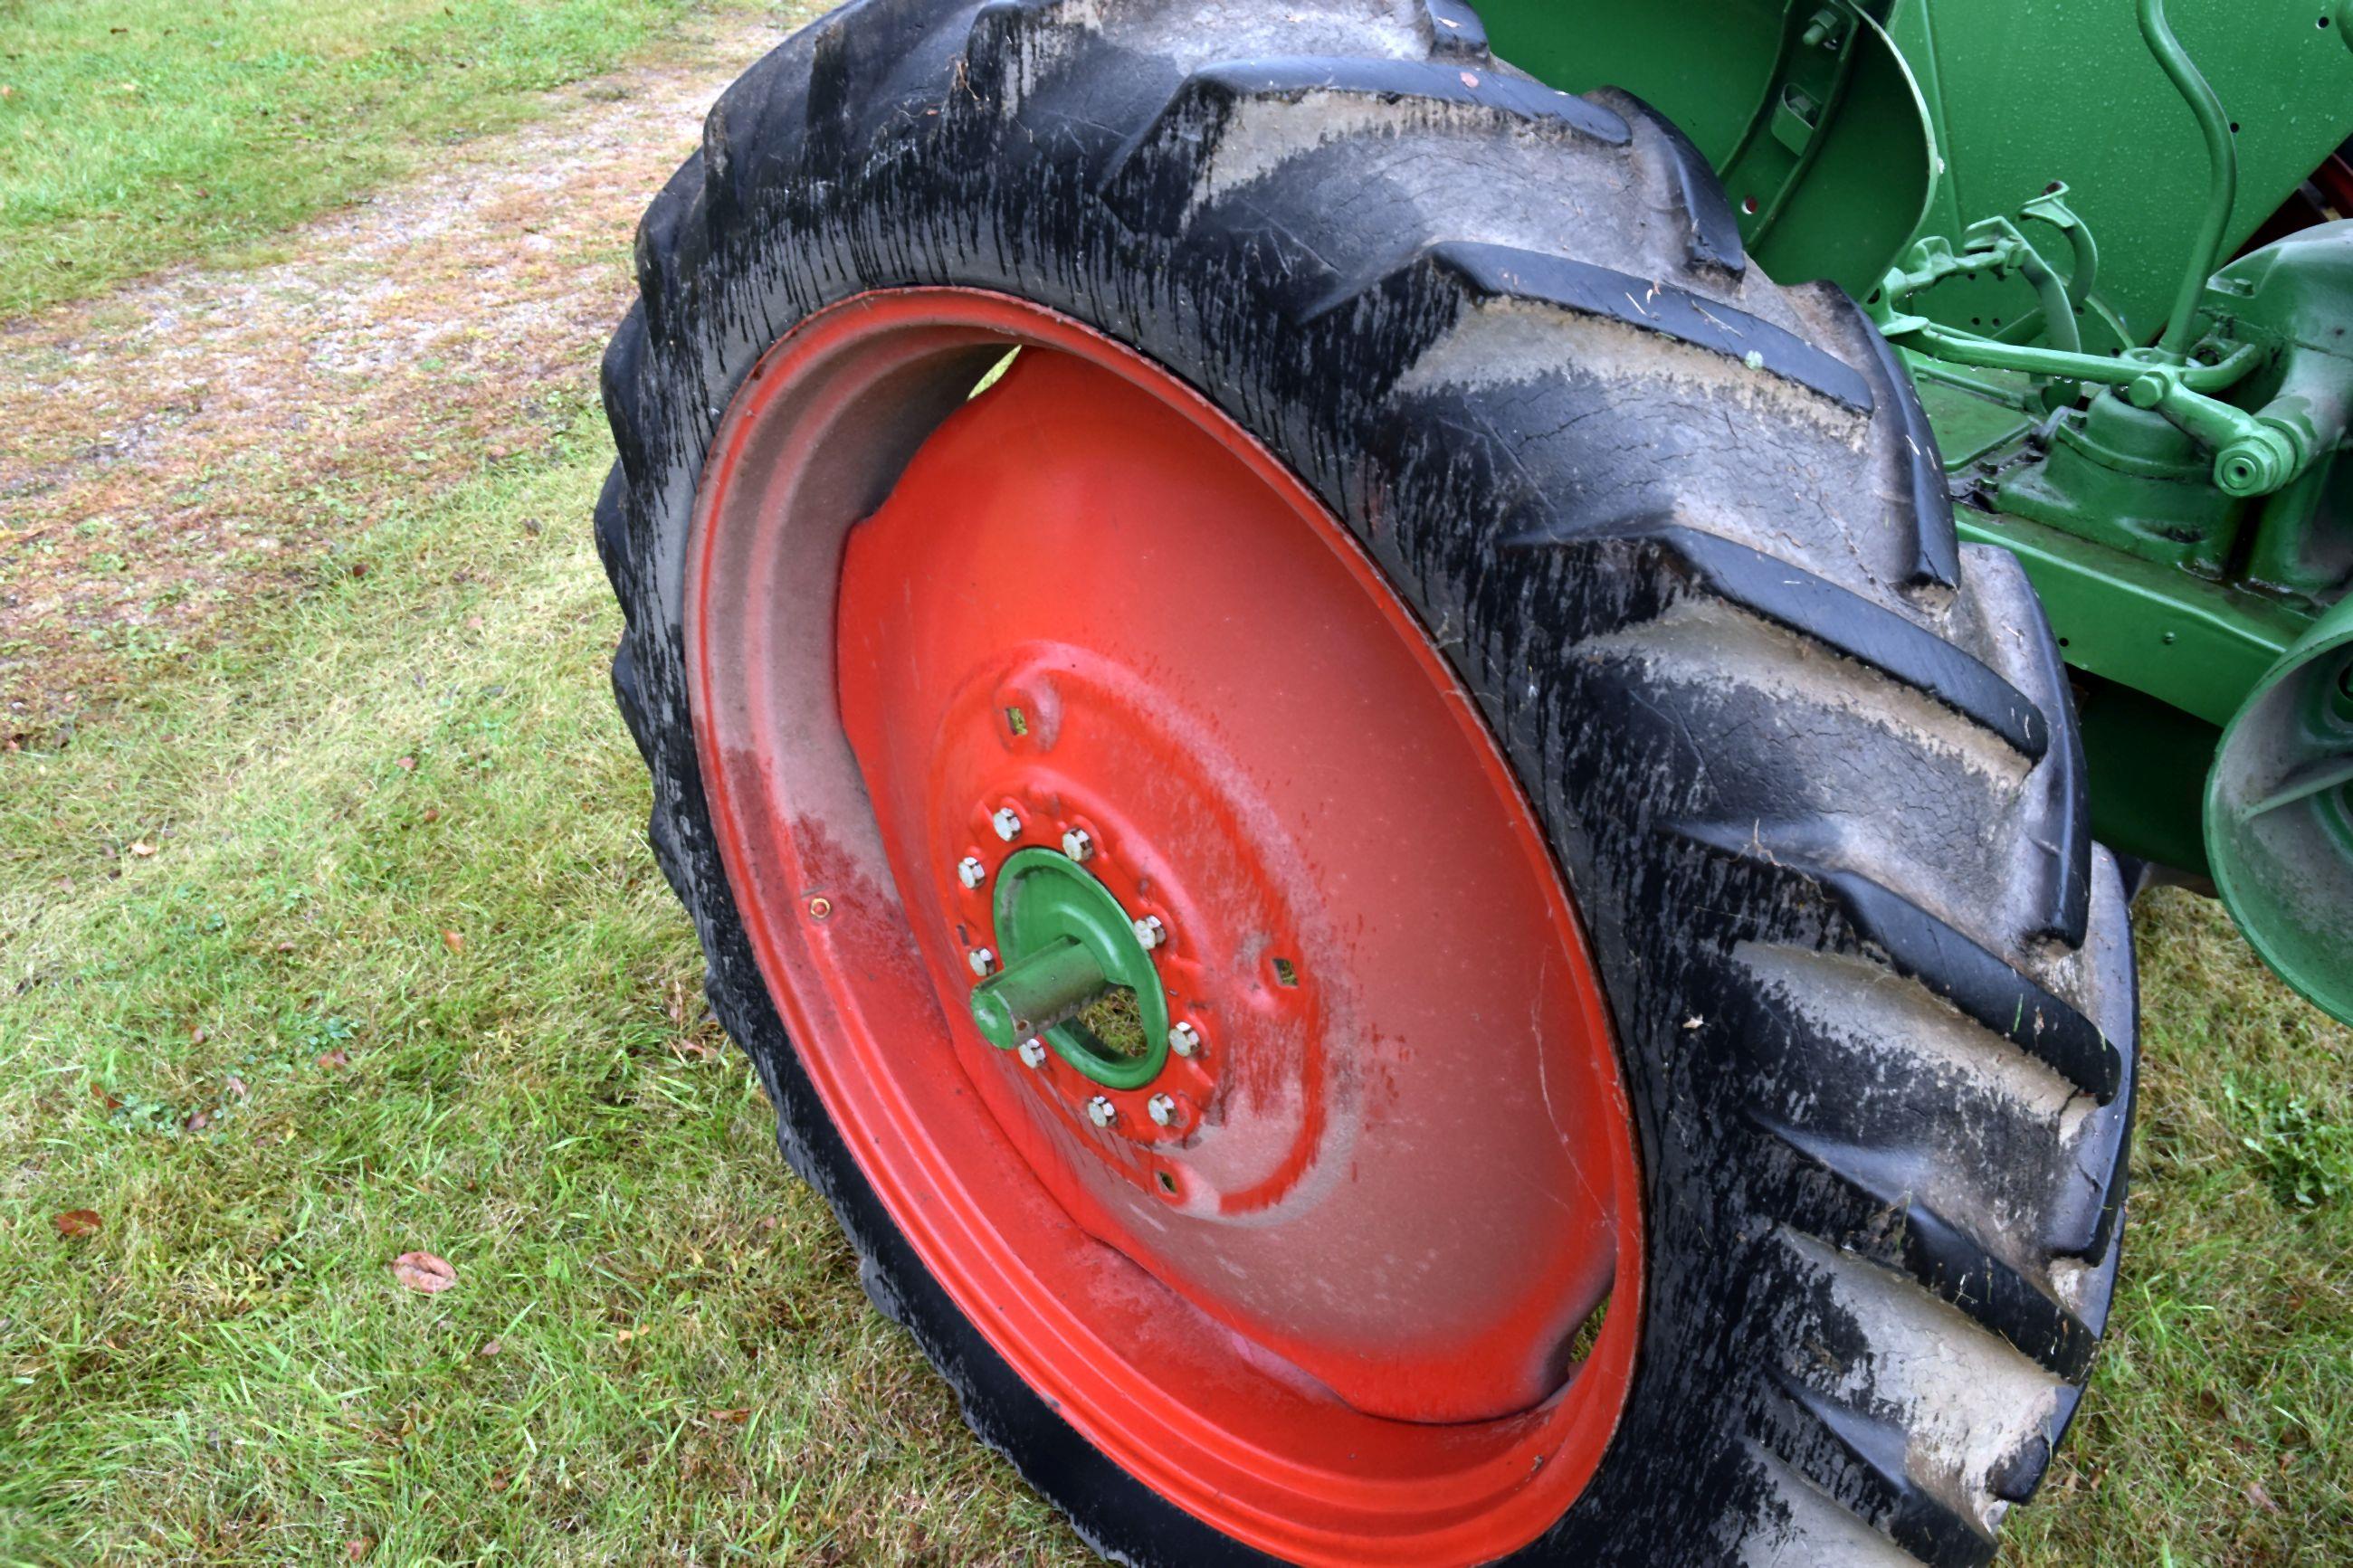 Oliver Row Crop 66, Wide Front, Good Tin, Fenders, 540 PTO, Rear Hitch, Belt Pulley, Gas Engine, Sid